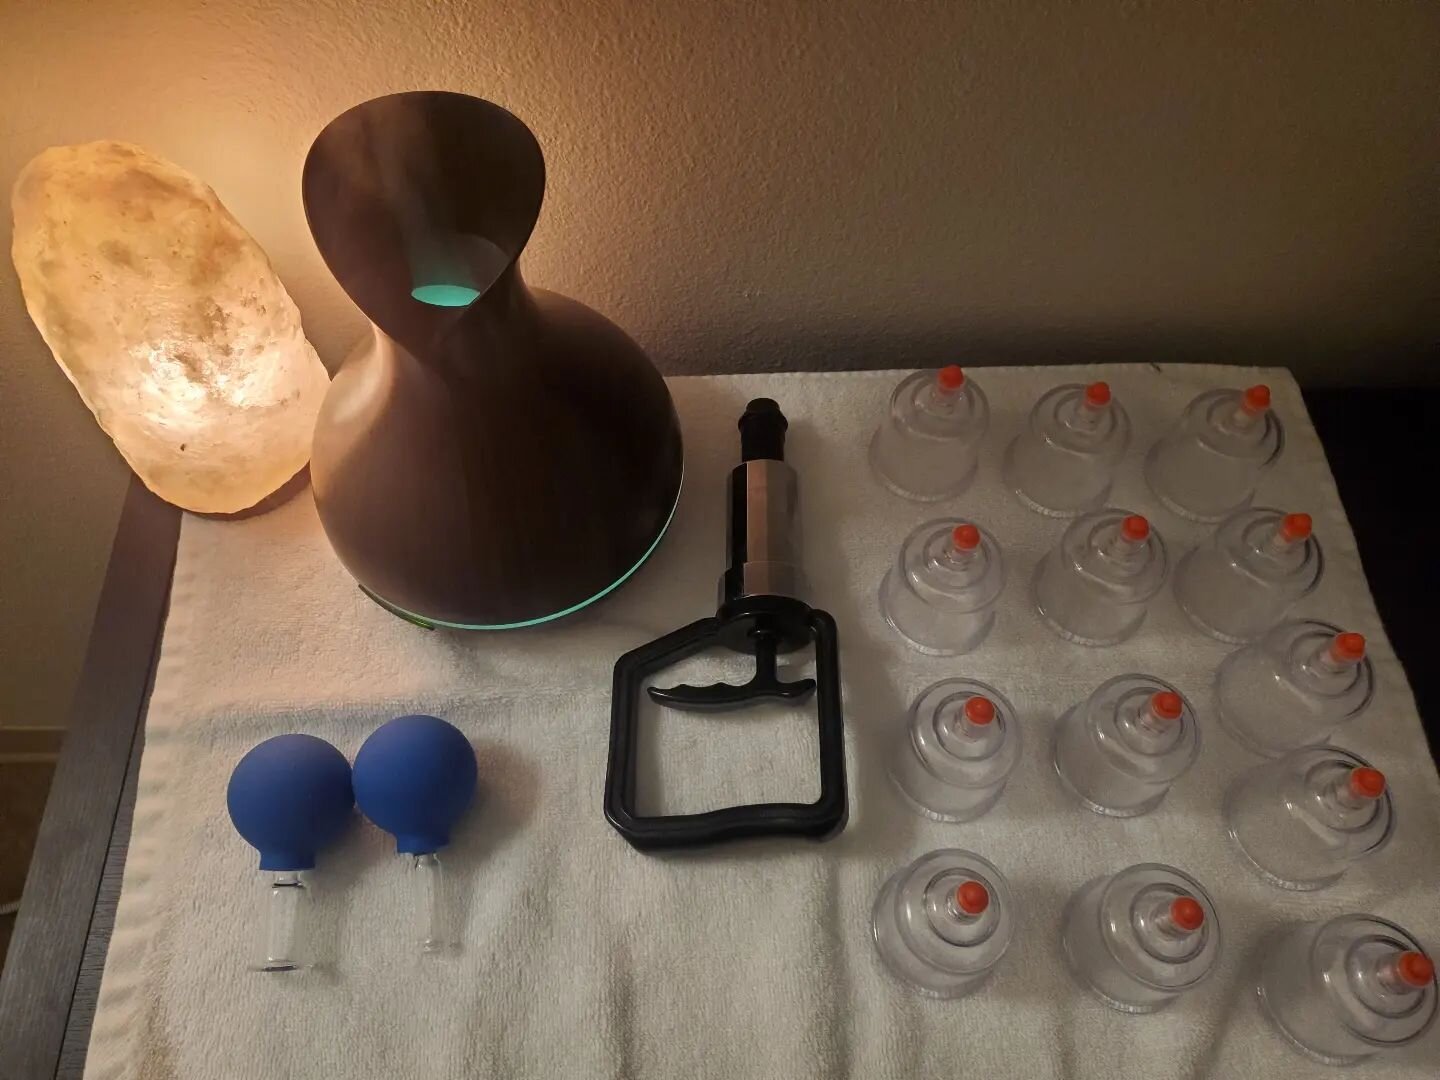 Manual Therapy Cupping is always included in the price of your session 💪

#cupping #cuppingtherapy #massage #massagetherapy #wellness #wellnessjourney #health #fascia #bodywork #Colorado #denver #selfcare #selflove #holistichealth